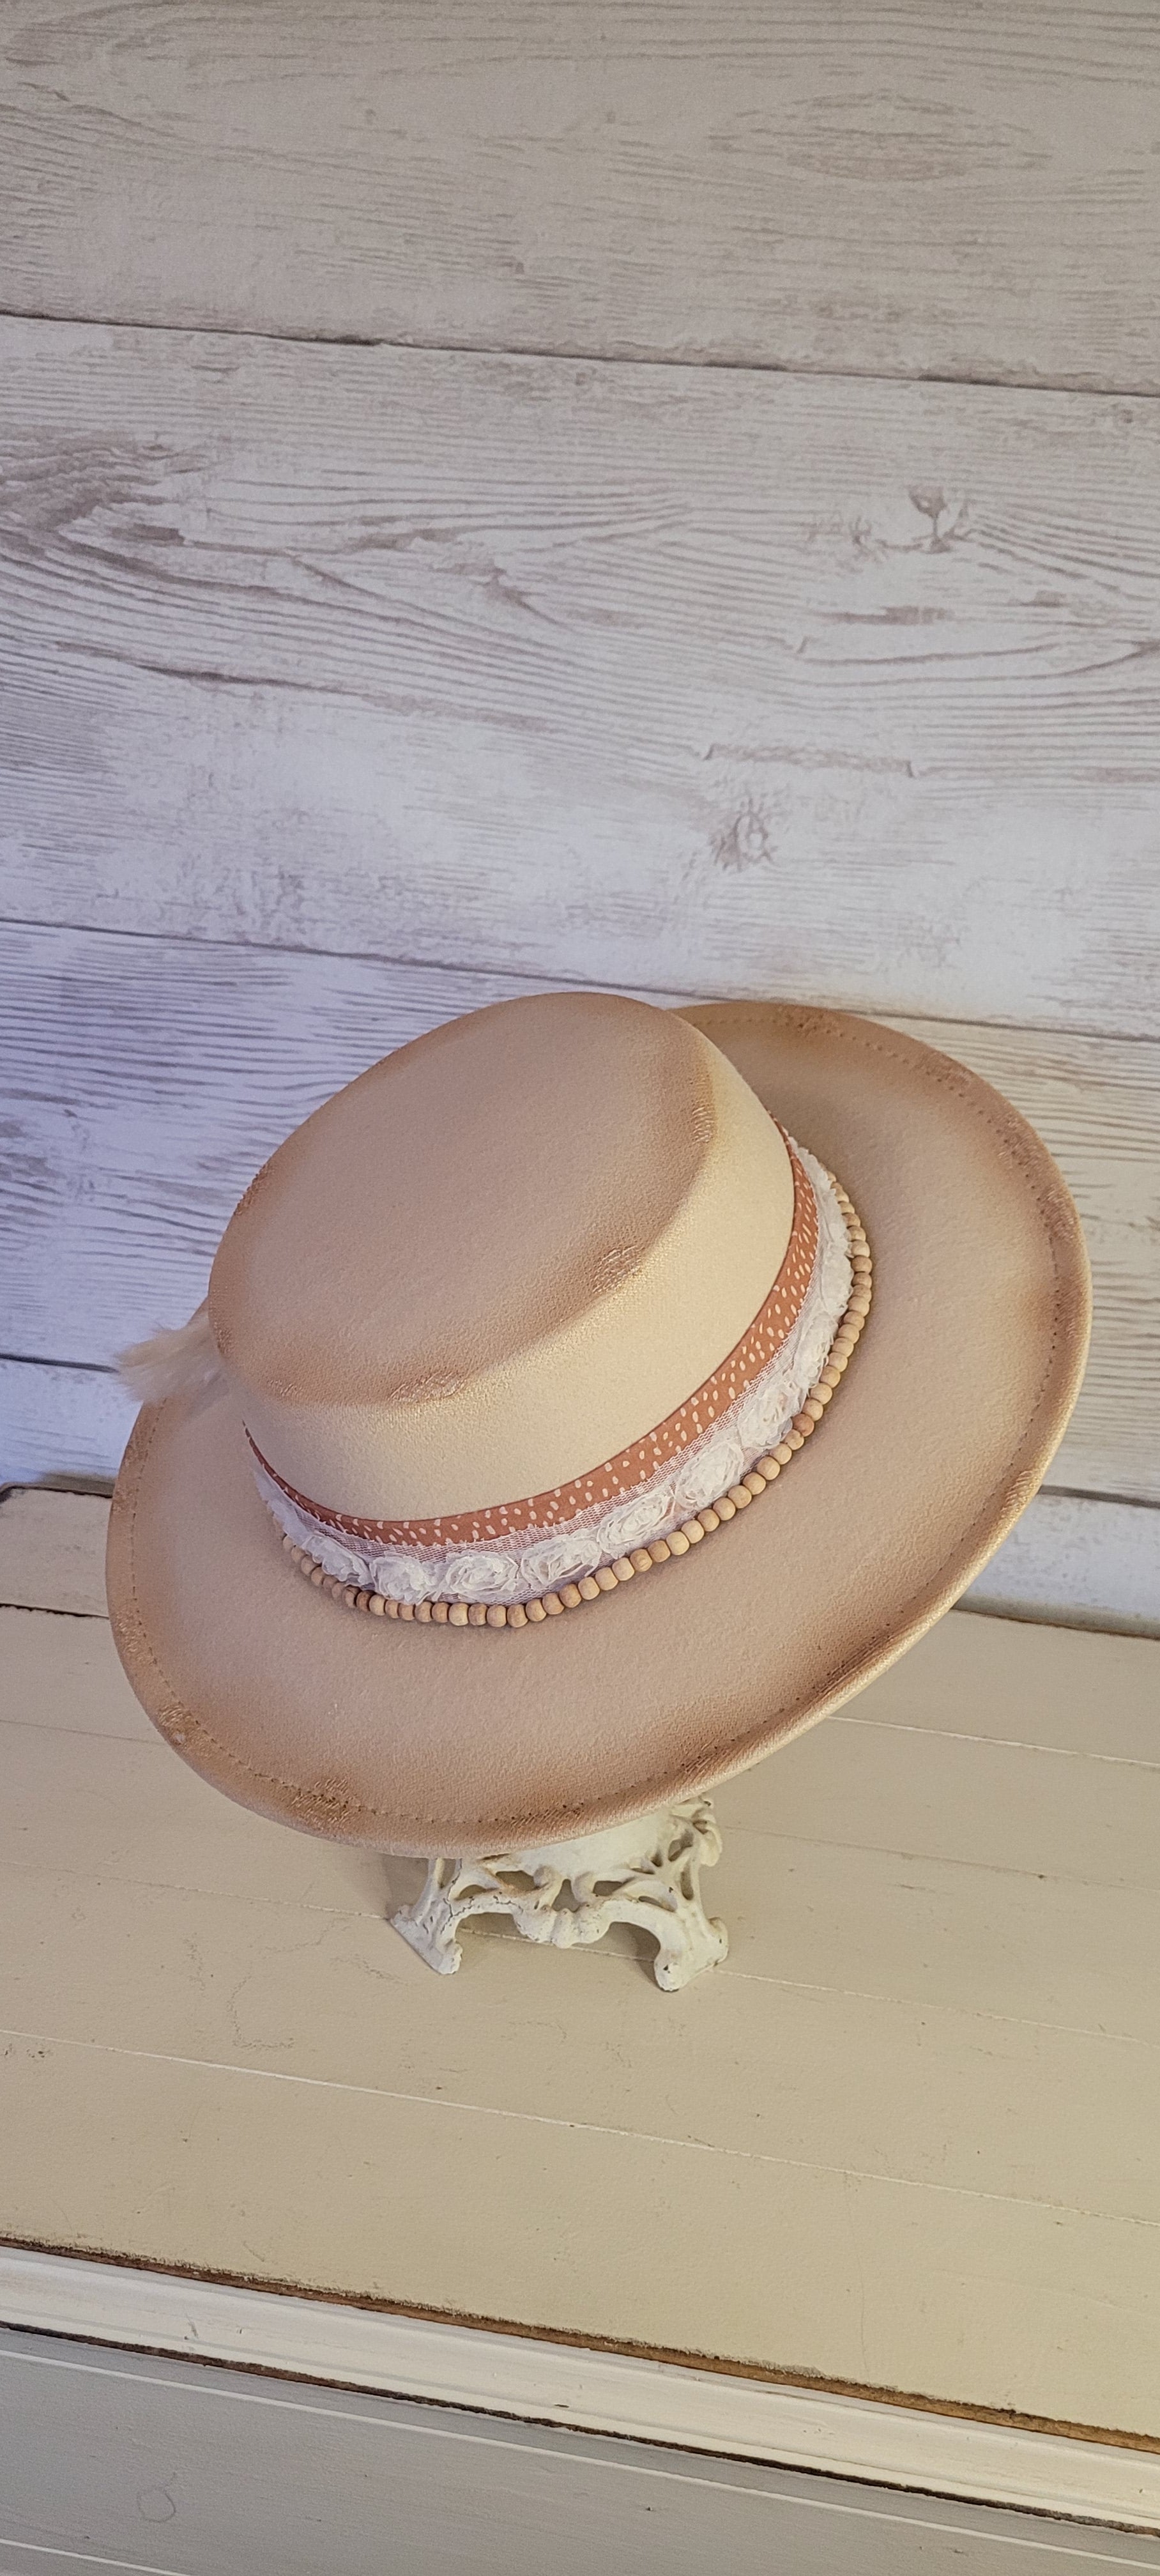 Sheer ribbon, flower ribbon, wooden bead band, pine cones & pampas Felt hat Flat brim 100% polyester Ribbon drawstring for hat size adjustment Head Circumference: 24" Crown Height: 3.5" Brim Length: 13.5" Brim Width: 12.75" Branded & numbered inside crown Custom burned by Kayla